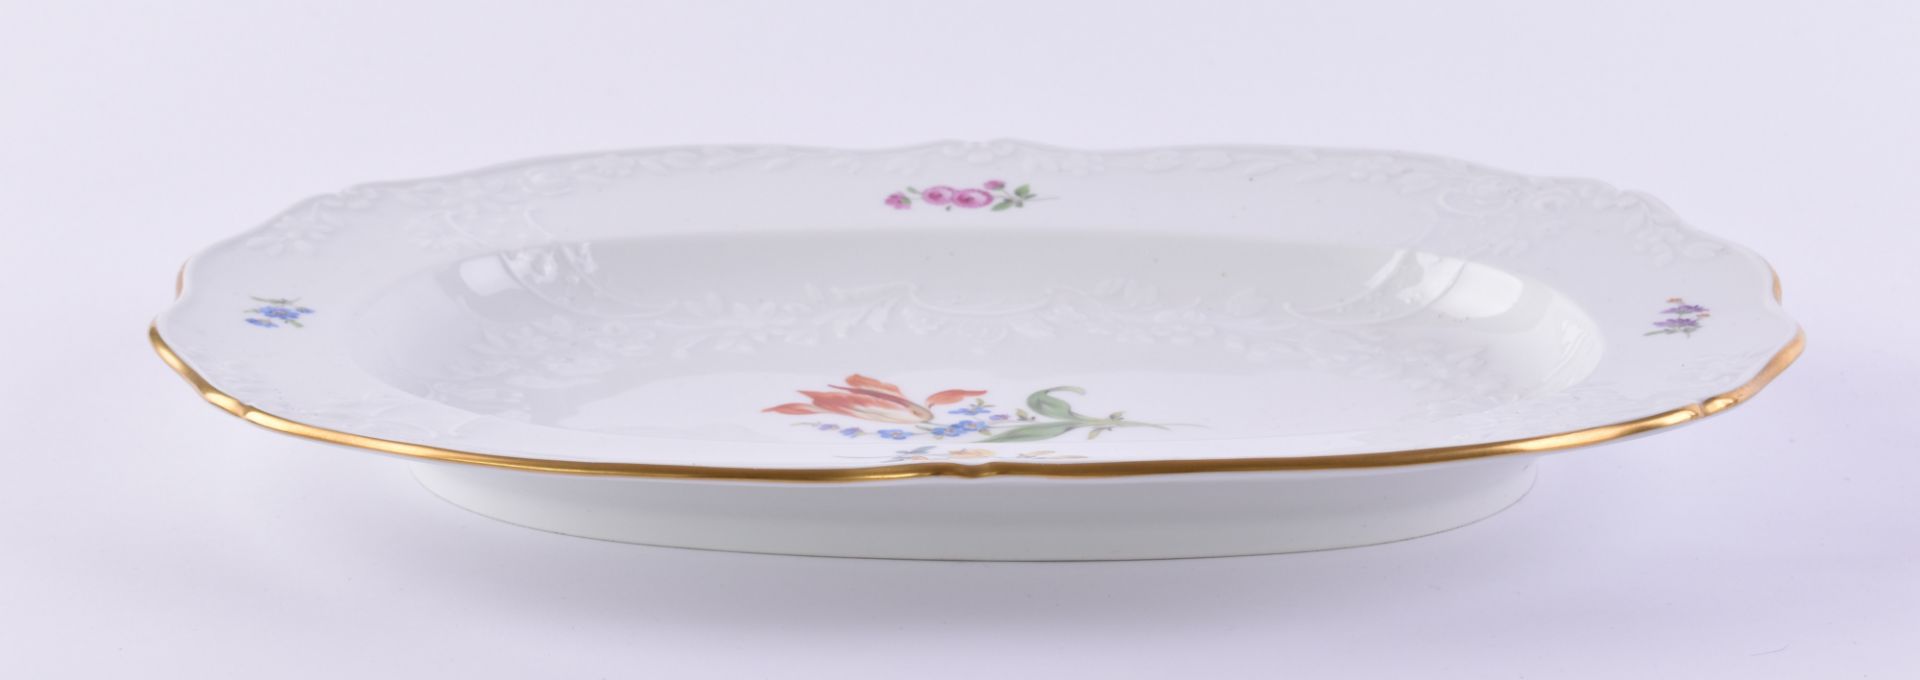 Large serving plate Meissen - Image 5 of 6